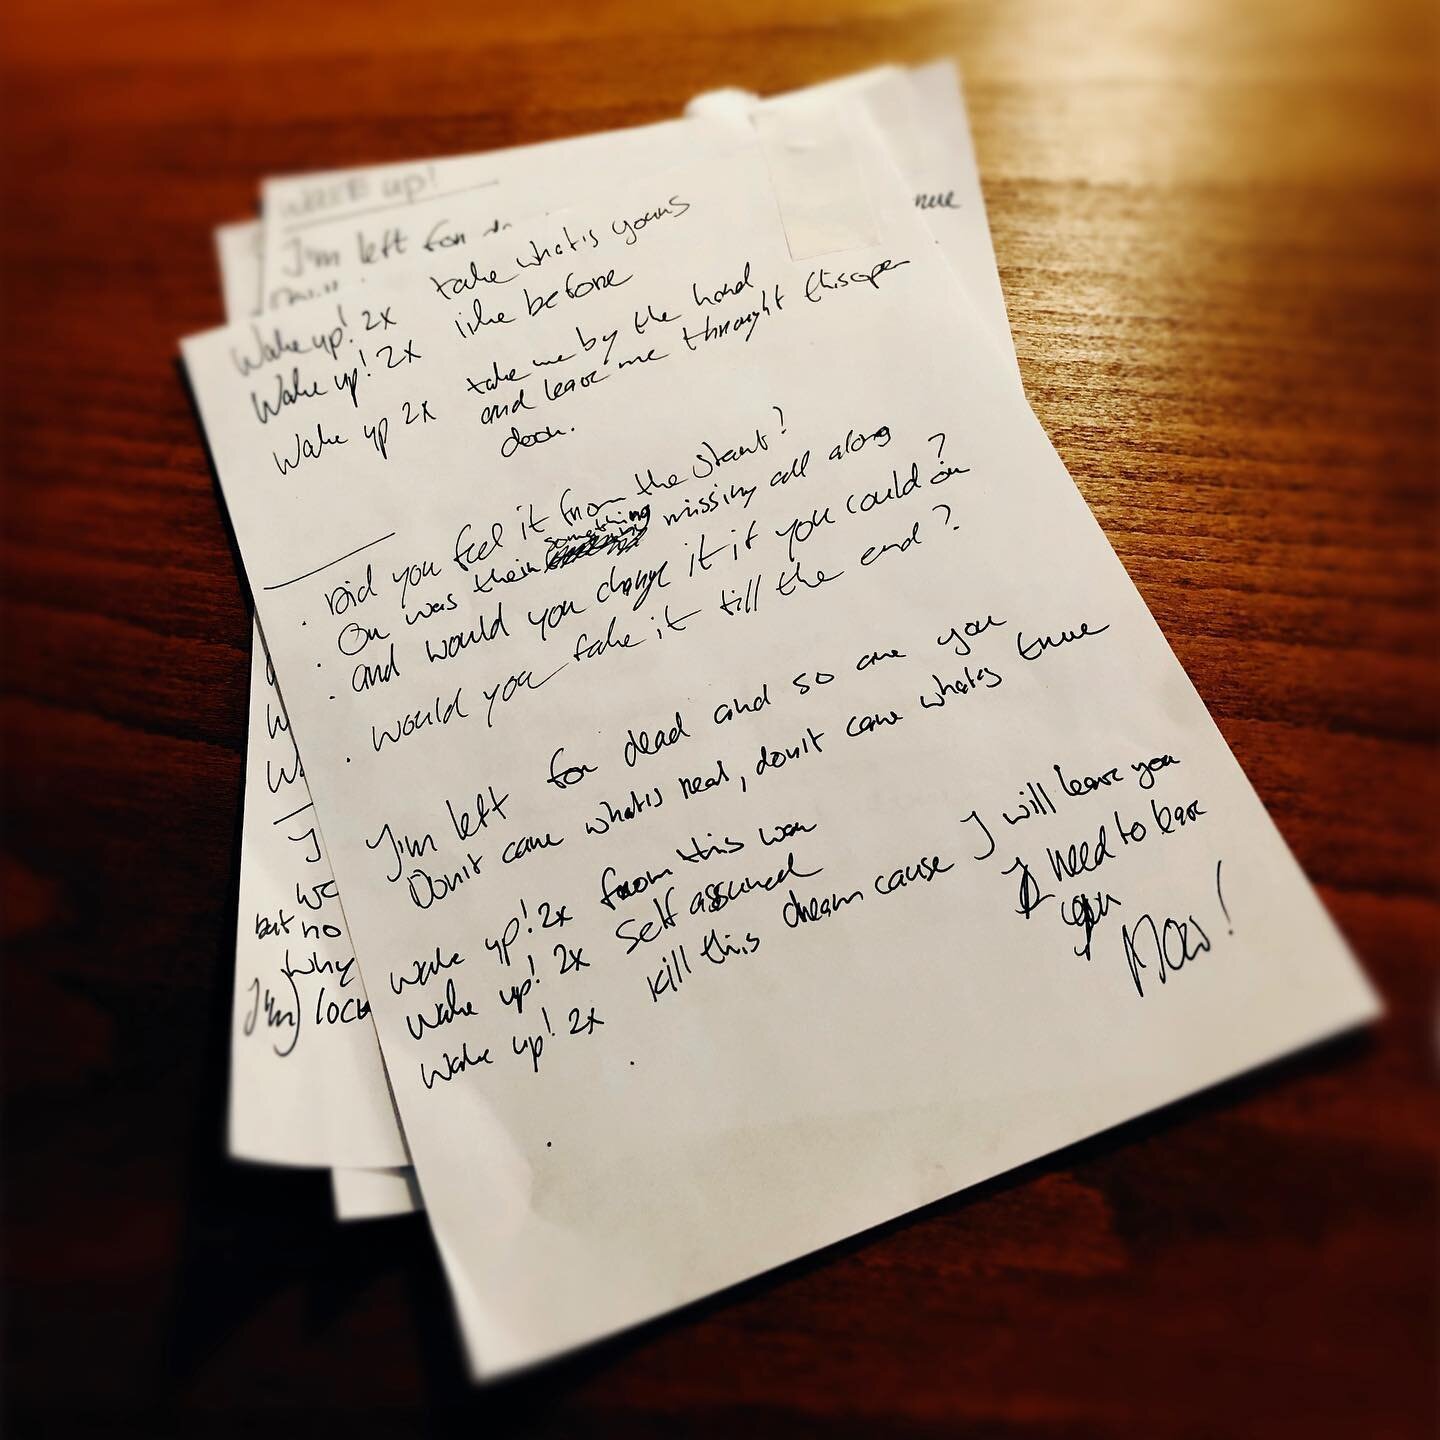 Lyric giveaway coming up!
A chance to win the first written version of our new single. There were some modifications to the lyrics but that makes it even better. 😉🤘🏼
Stay tuned! And keep spinning that song. Thanks! 🎧
.
.
.
.
.
.
.
#newsingle #wak